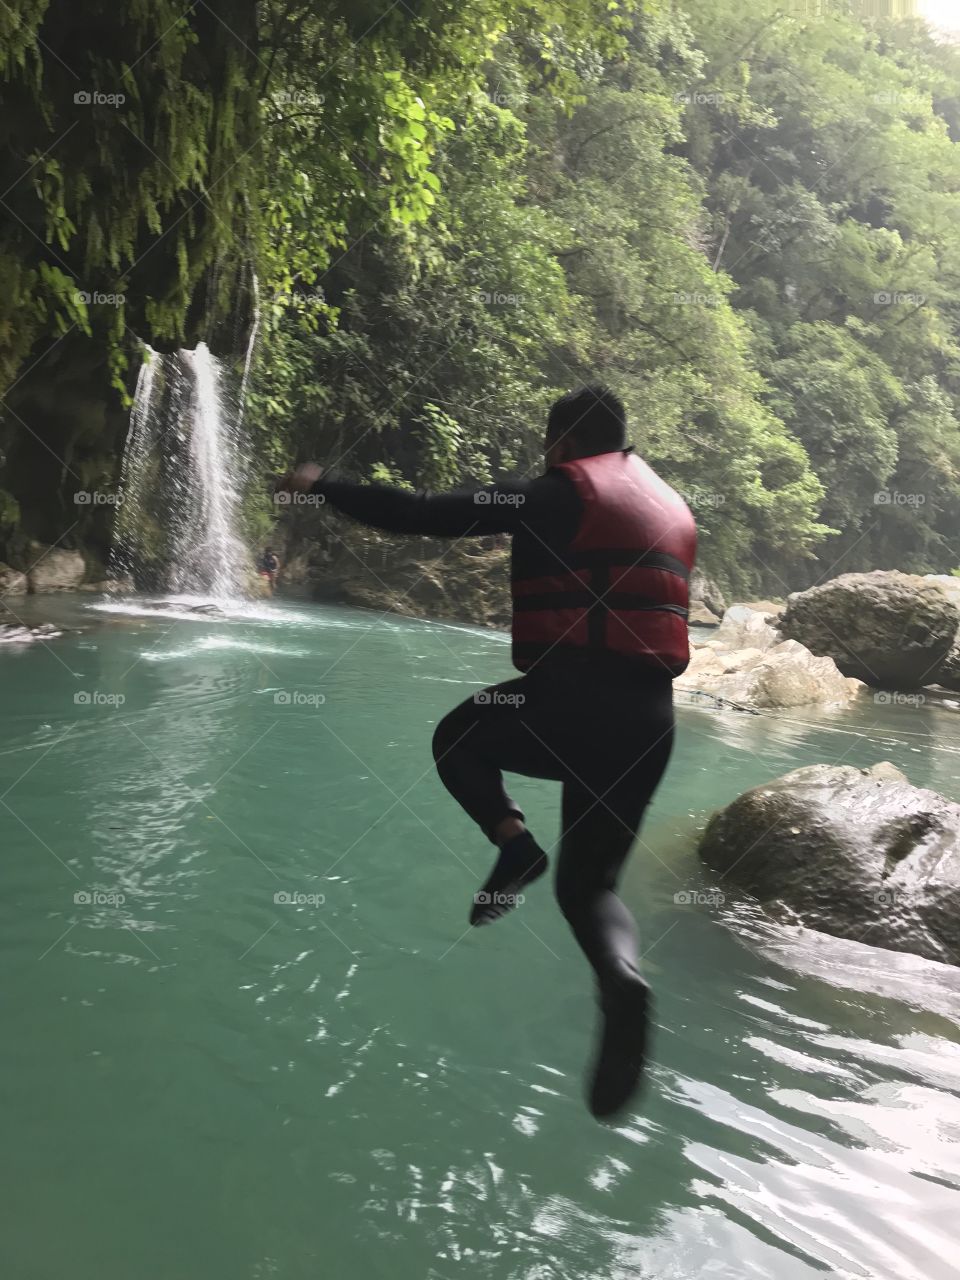 Sometimes you just gotta take the leap of faith into the deep and unknown. Mexico waterfalls in Punte de Dios